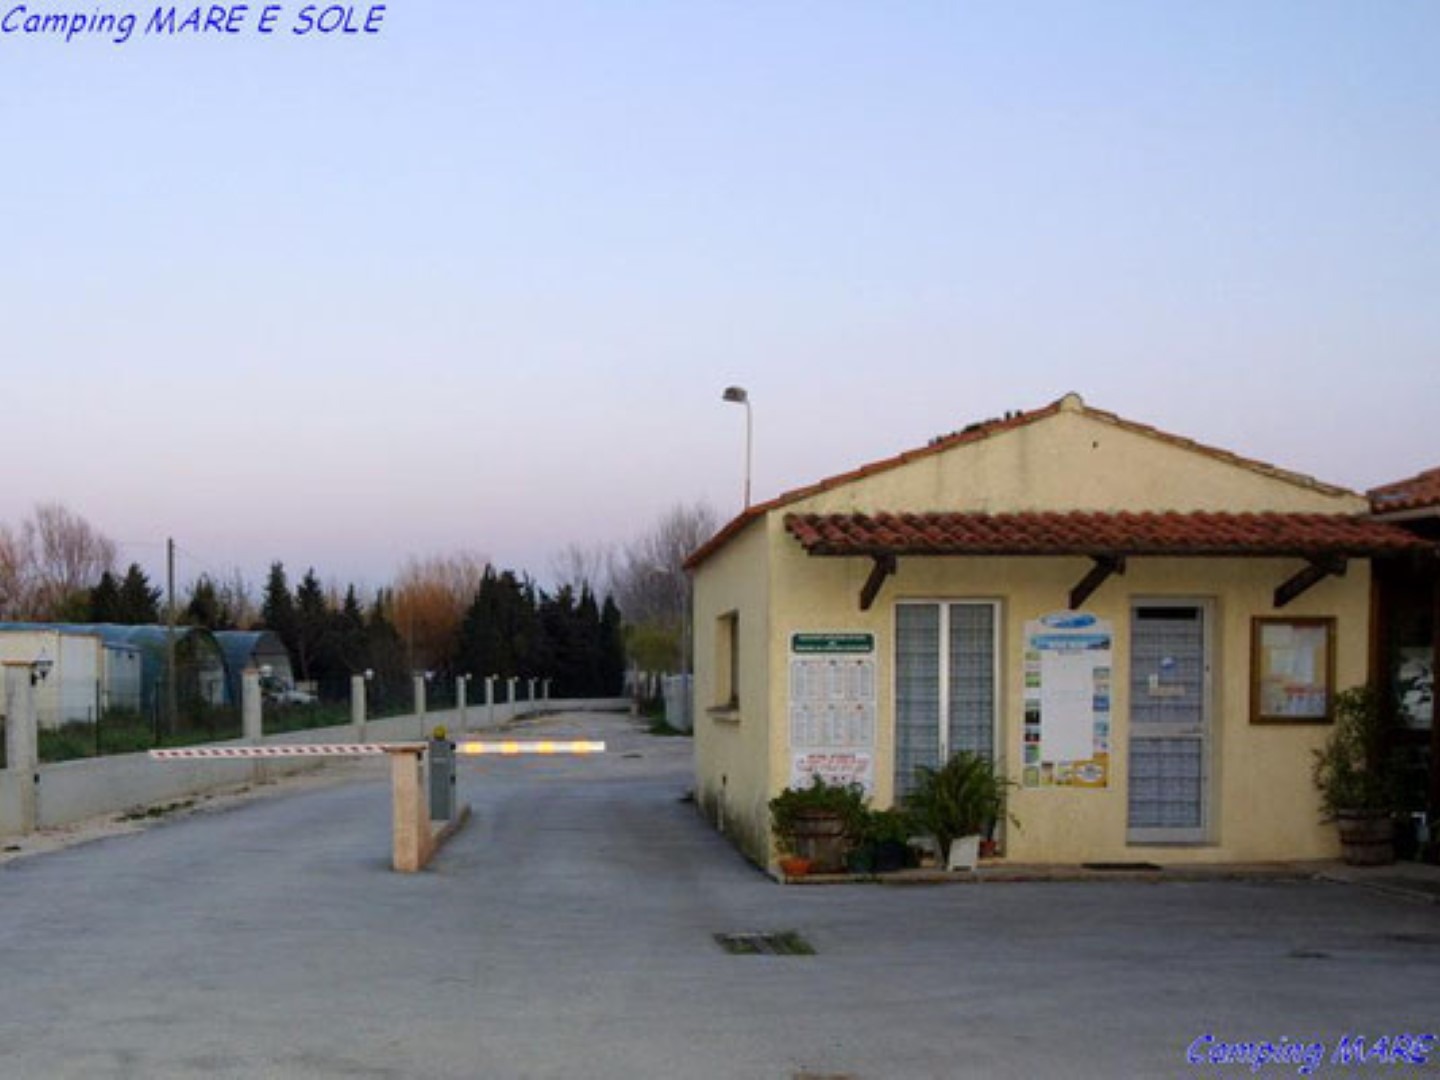 franse-camping Camping mare e sole Hyres